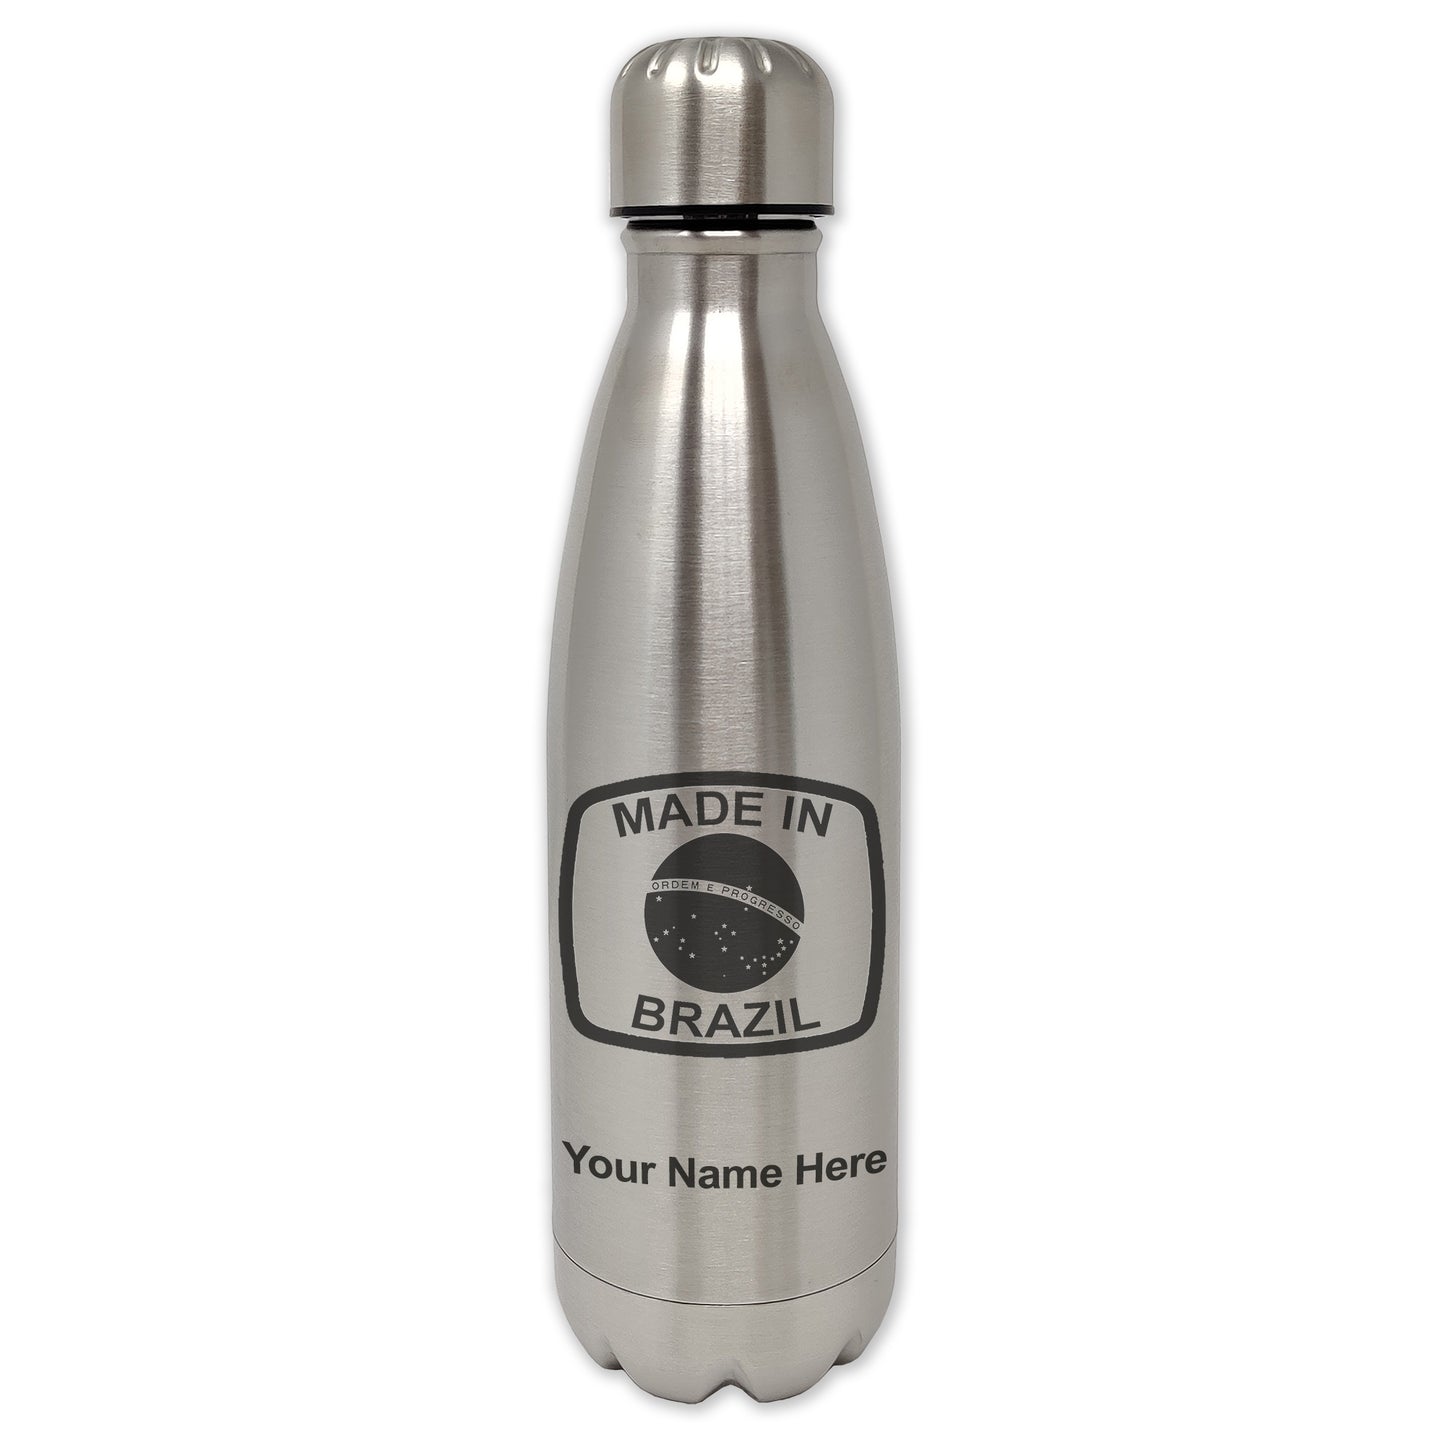 LaserGram Double Wall Water Bottle, Made in Brazil, Personalized Engraving Included